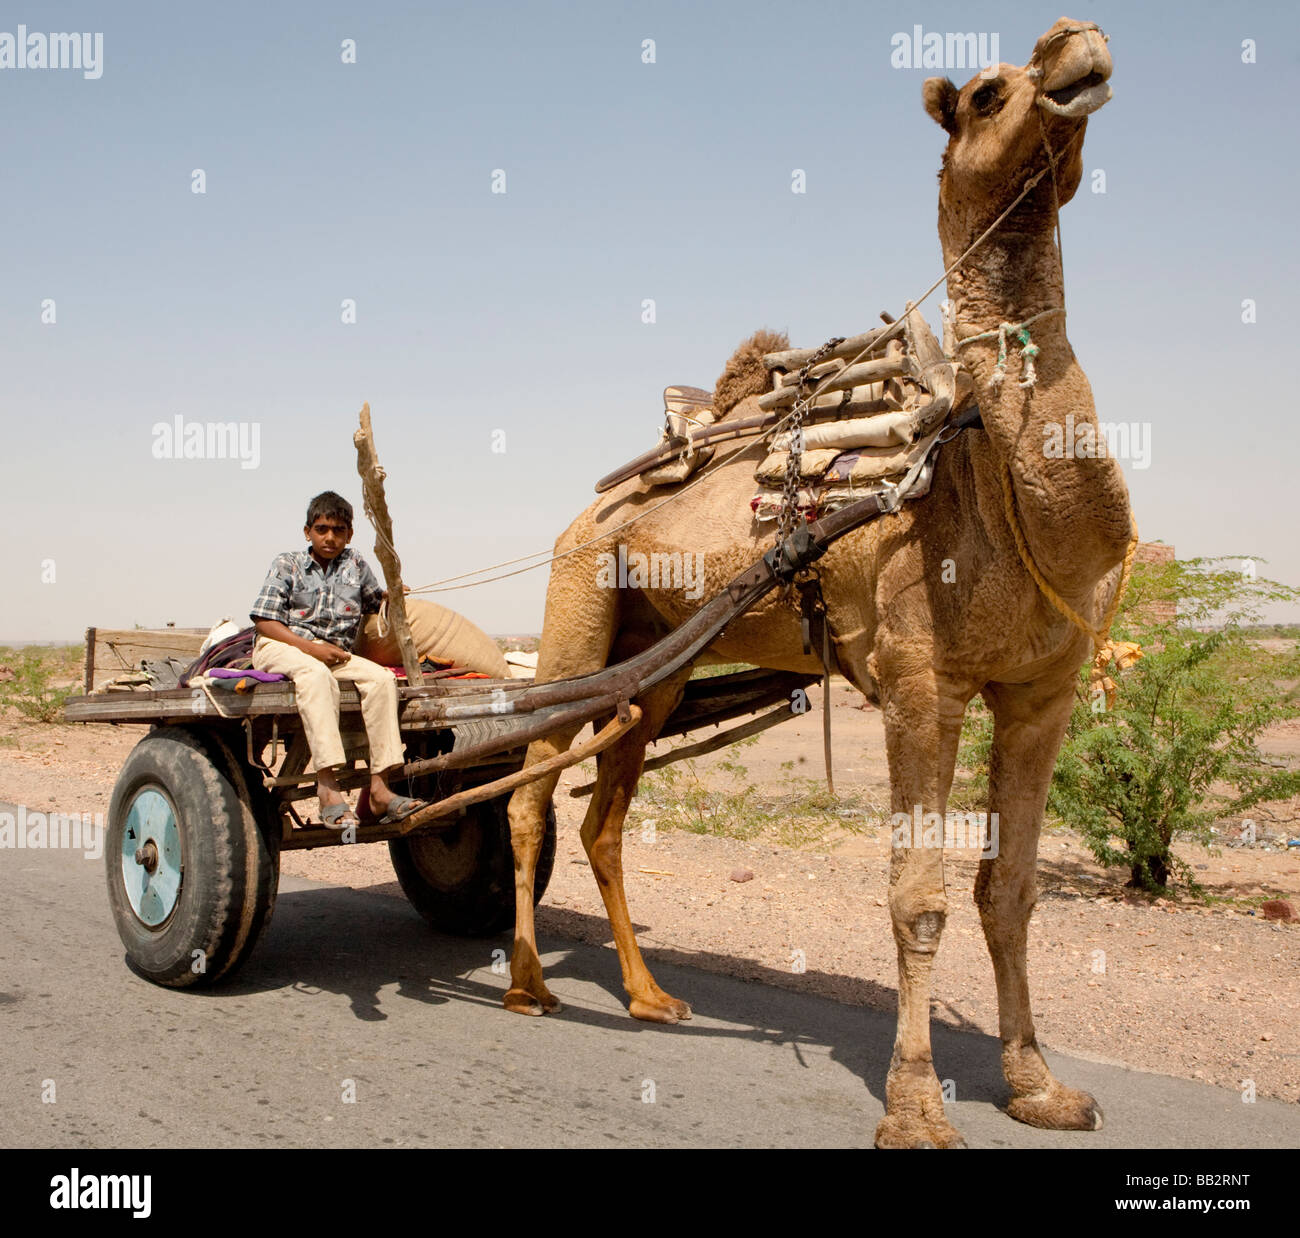 Powered By Camel Rajisthan Remorque Inde Banque D'Images